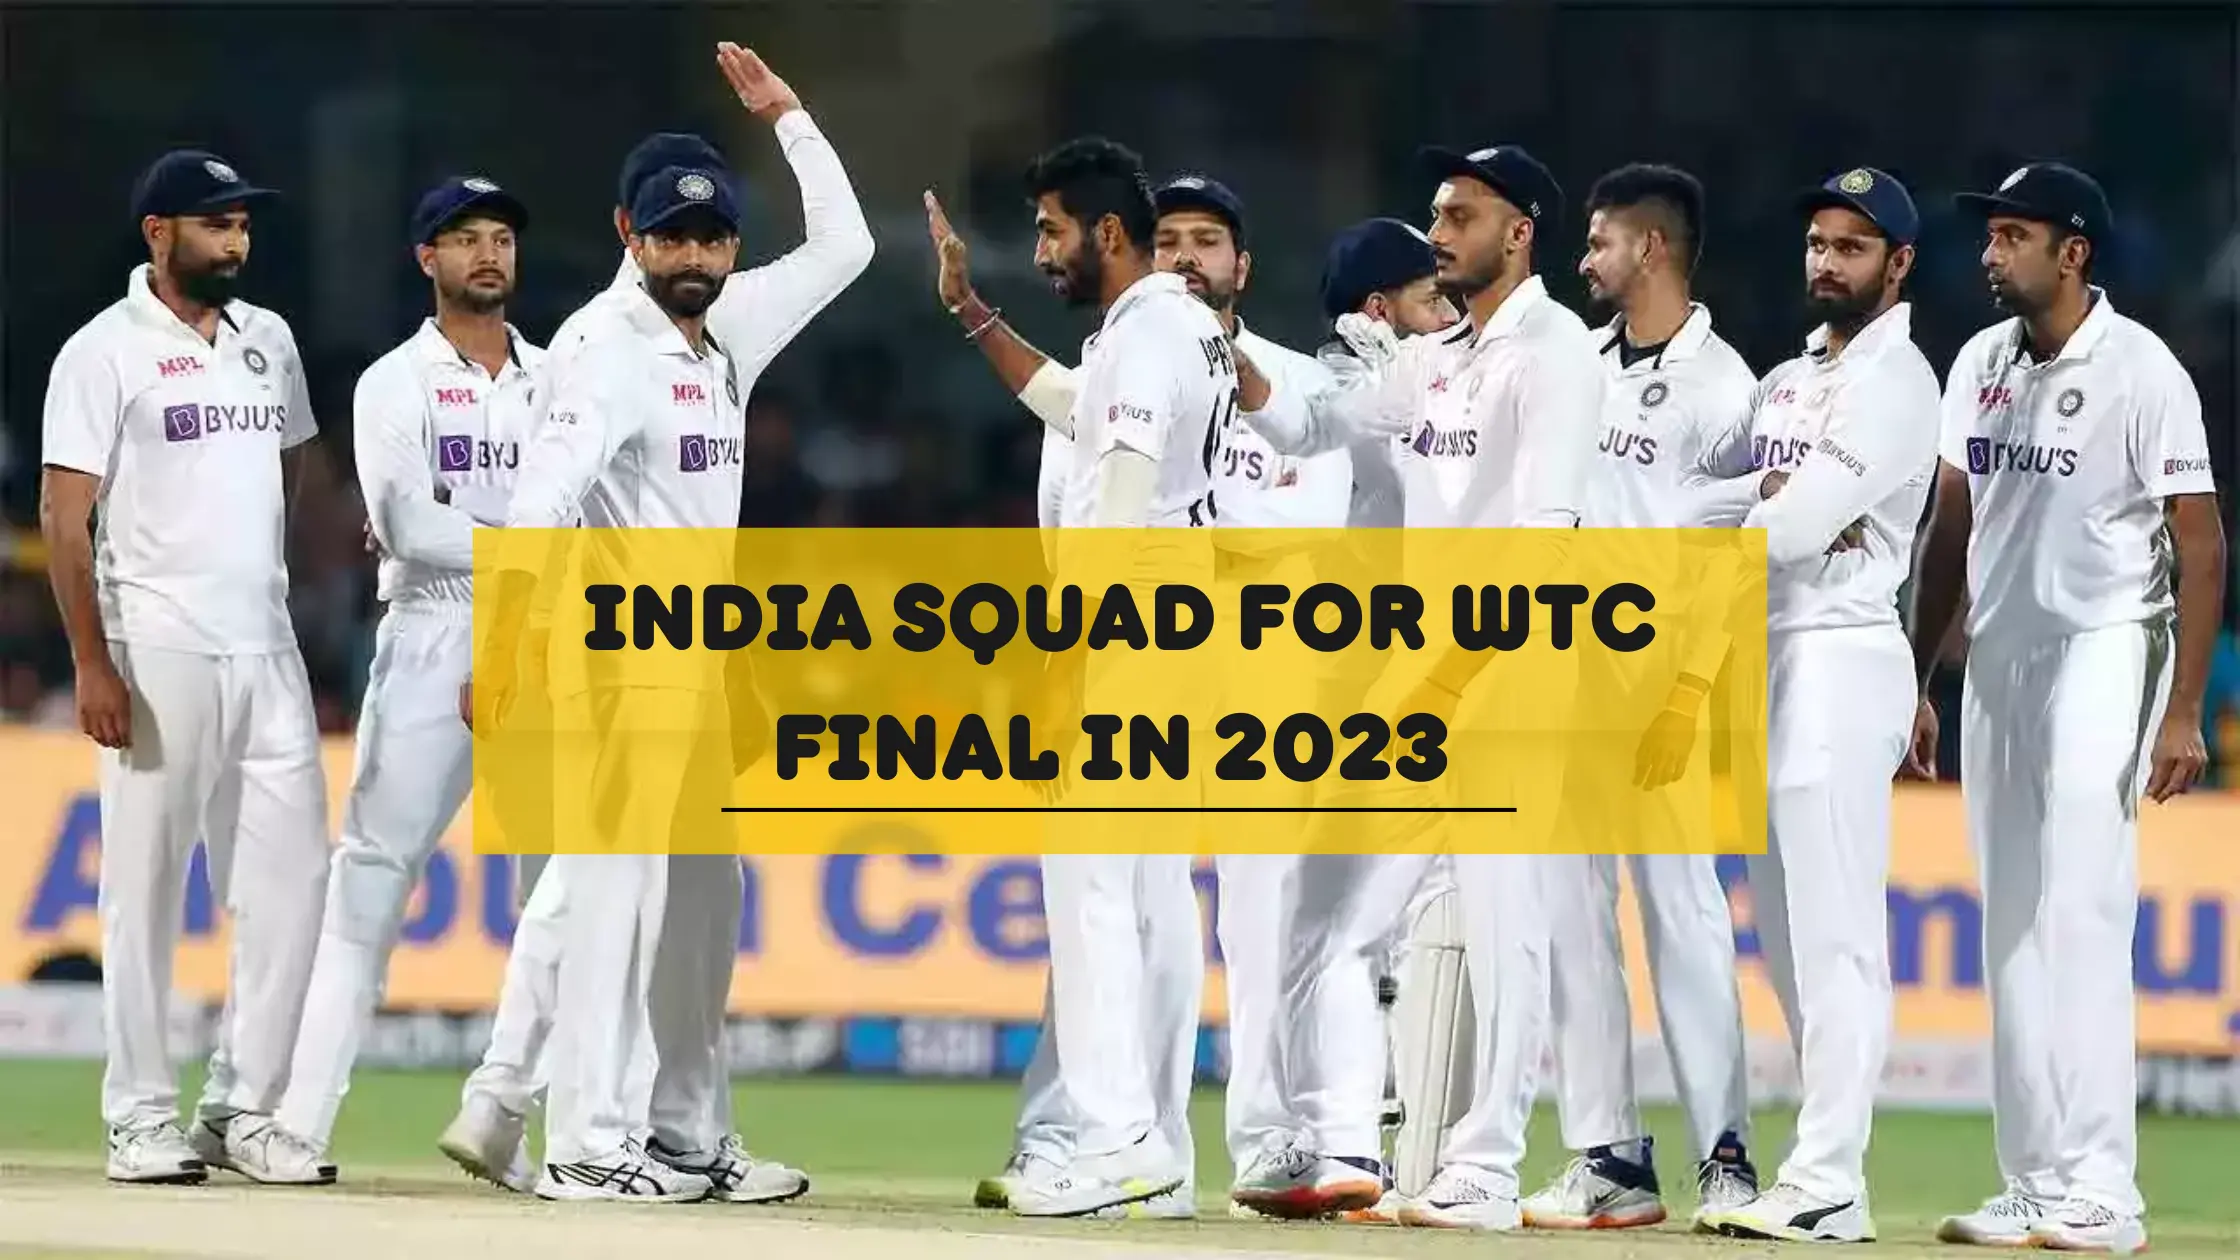 India Announced Squad for WTC final in 2023